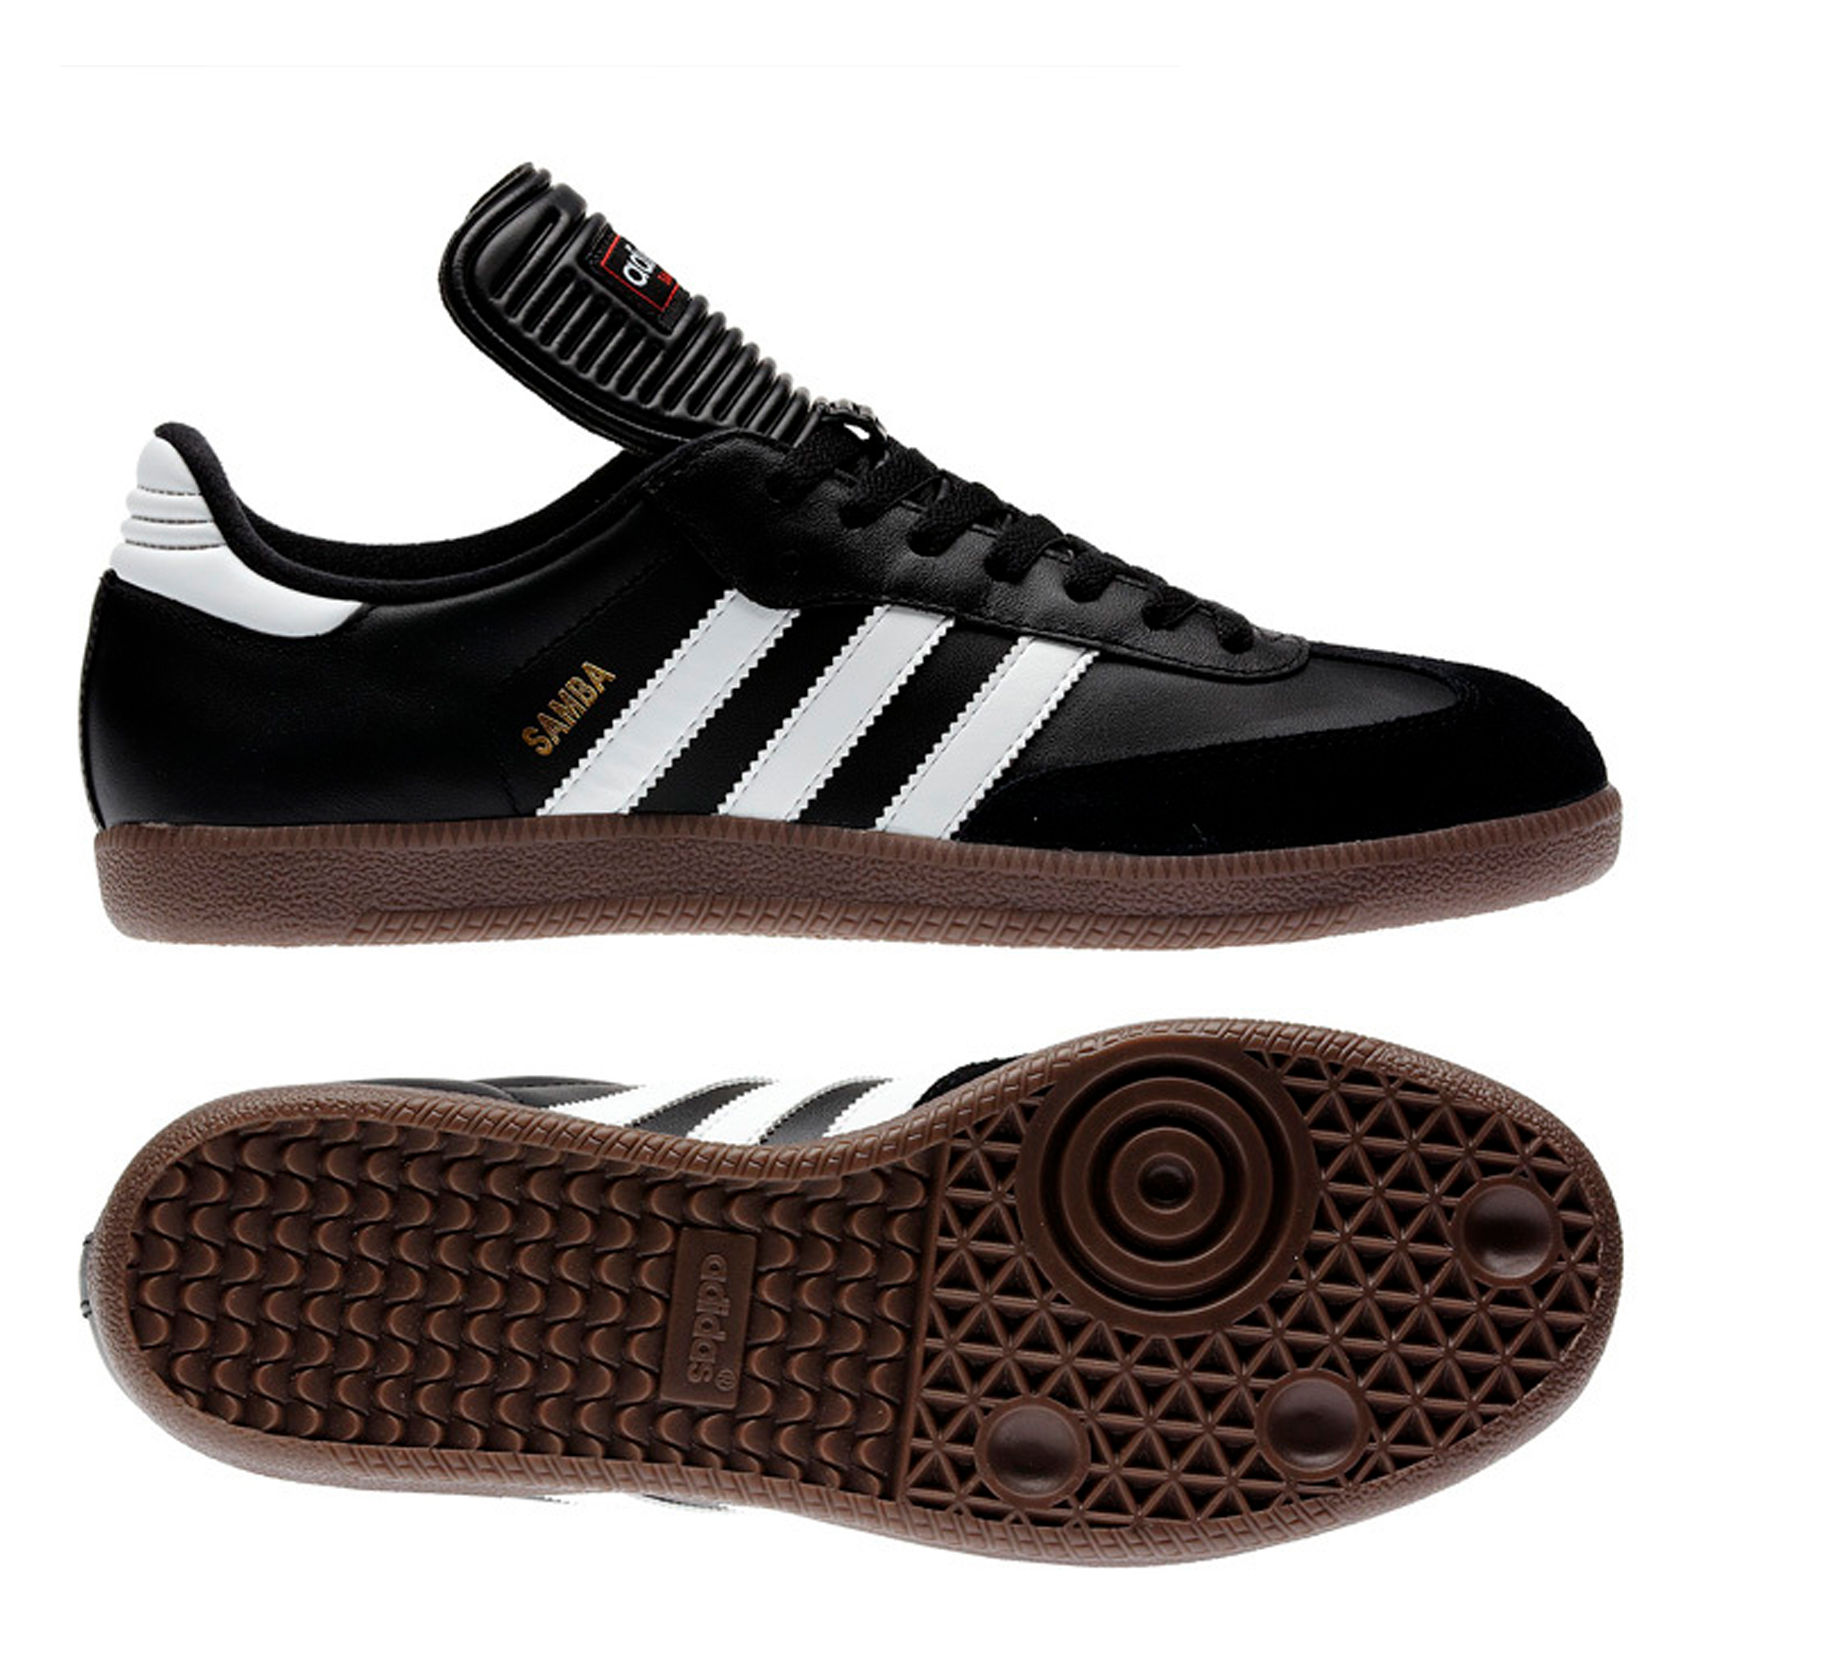 Maak avondeten officieel Beperken A guide to the Adidas Samba, the sneakers linking football and fashion